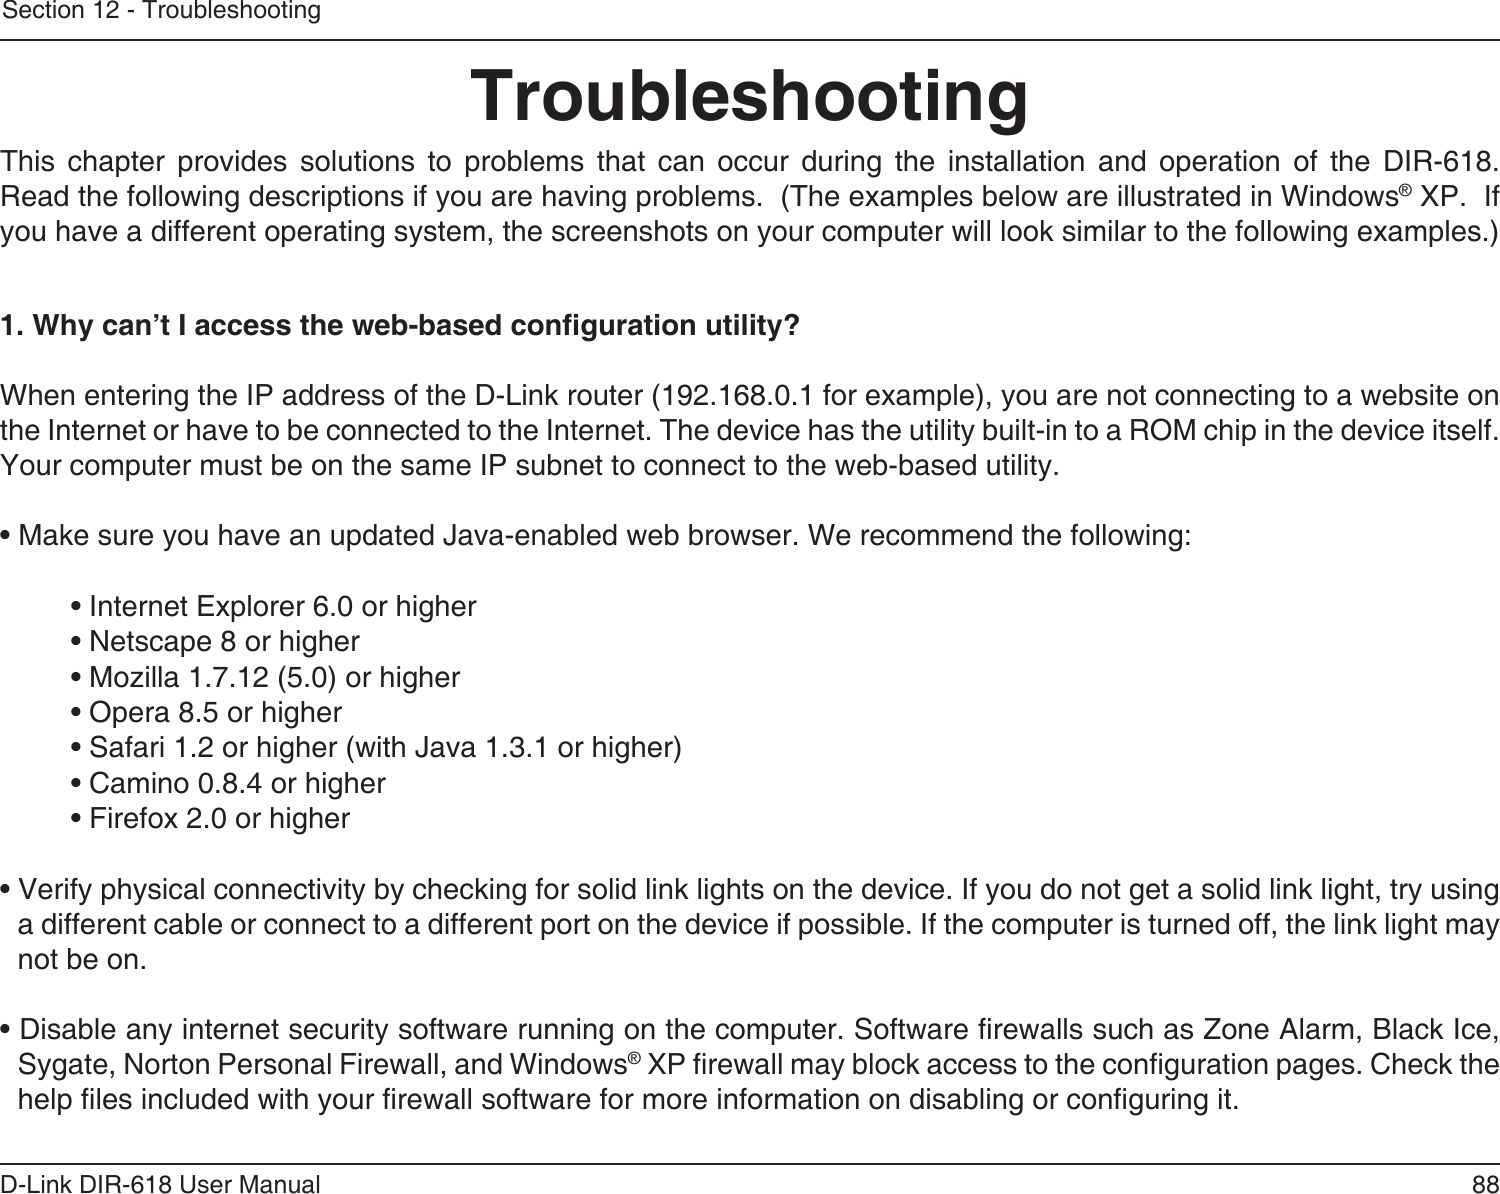 88D-Link DIR-618 User ManualSection 12 - TroubleshootingTroubleshootingThis  chapter  provides  solutions  to  problems  that  can  occur  during  the  installation  and  operation  of  the  DIR-618. Read the following descriptions if you are having problems.  (The examples below are illustrated in Windows® XP.  Ifyou have a different operating system, the screenshots on your computer will look similar to the following examples.)1. Why can’t I access the web-based conguration utility?When entering the IP address of the D-Link router (192.168.0.1 for example), you are not connecting to a website on the Internet or have to be connected to the Internet. The device has the utility built-in to a ROM chip in the device itself.Your computer must be on the same IP subnet to connect to the web-based utility. • Make sure you have an updated Java-enabled web browser. We recommend the following: • Internet Explorer 6.0 or higher • Netscape 8 or higher • Mozilla 1.7.12 (5.0) or higher • Opera 8.5 or higher • Safari 1.2 or higher (with Java 1.3.1 or higher) • Camino 0.8.4 or higher • Firefox 2.0 or higher • Verify physical connectivity by checking for solid link lights on the device. If you do not get a solid link light, try using a different cable or connect to a different port on the device if possible. If the computer is turned off, the link light may not be on.• Disable any internet security software running on the computer. Software rewalls such as Zone Alarm, Black Ice, Sygate, Norton Personal Firewall, and Windows® XP rewall may block access to the conguration pages. Check the help les included with your rewall software for more information on disabling or conguring it.